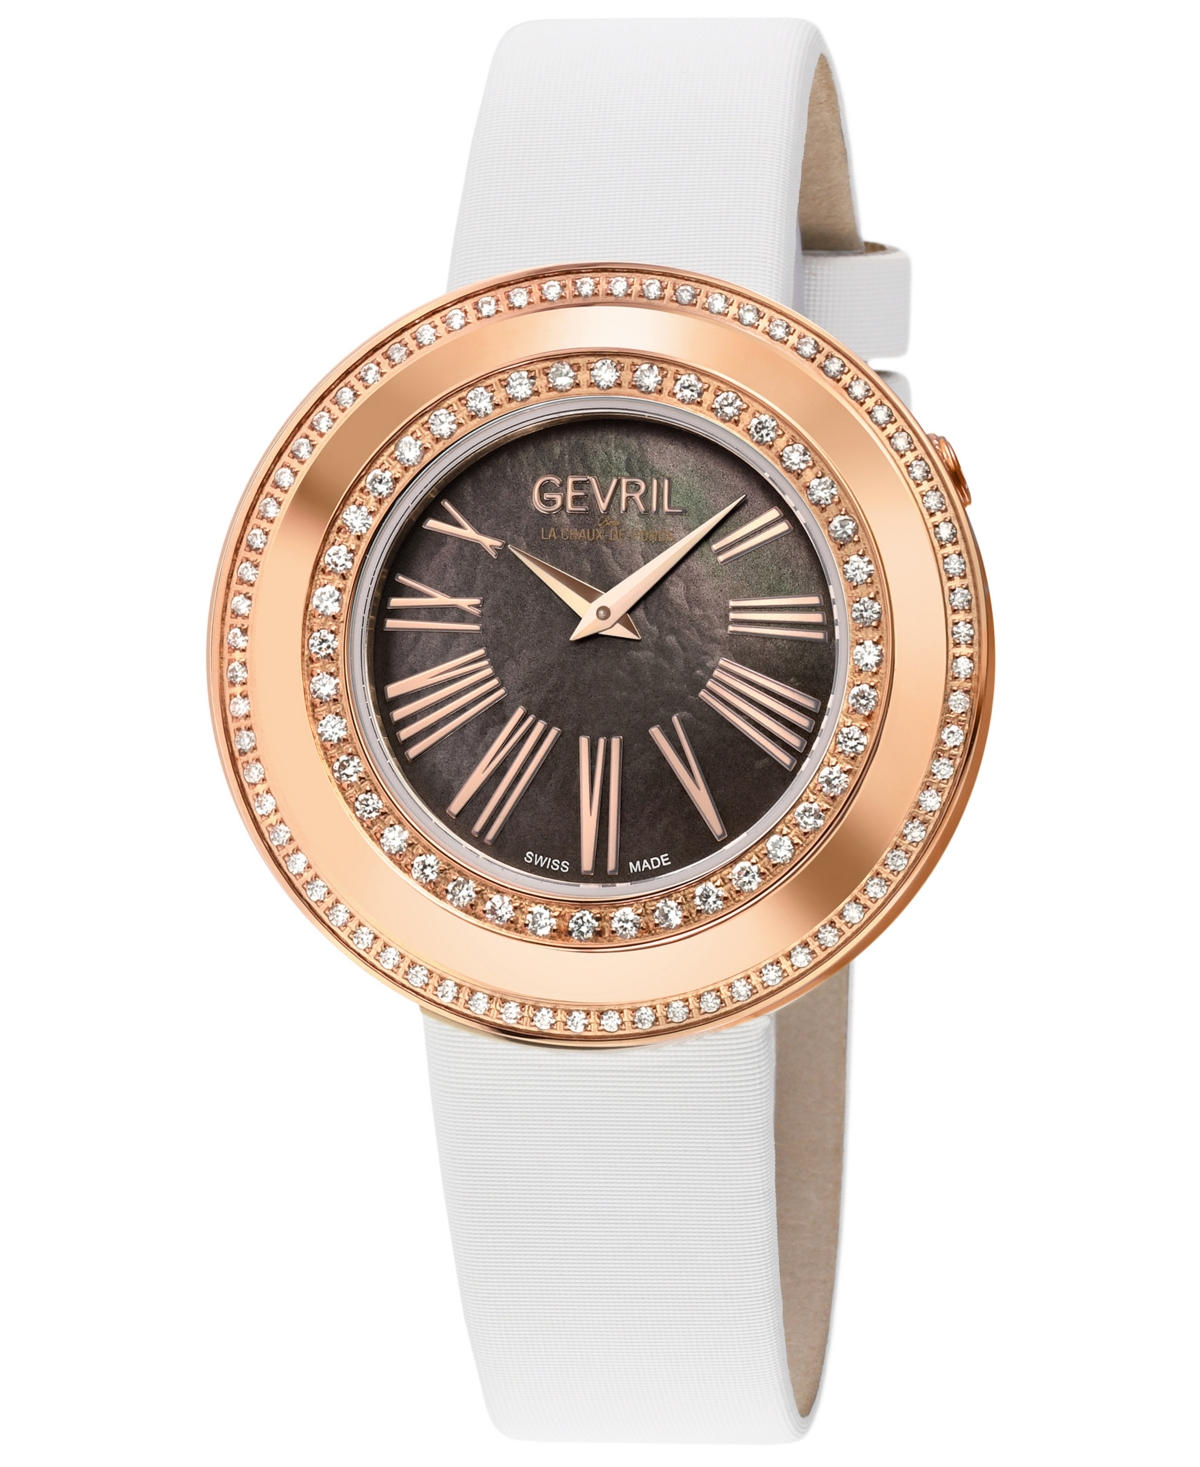 Gevril Women's Gandria White Leather Watch 36mm In Rose